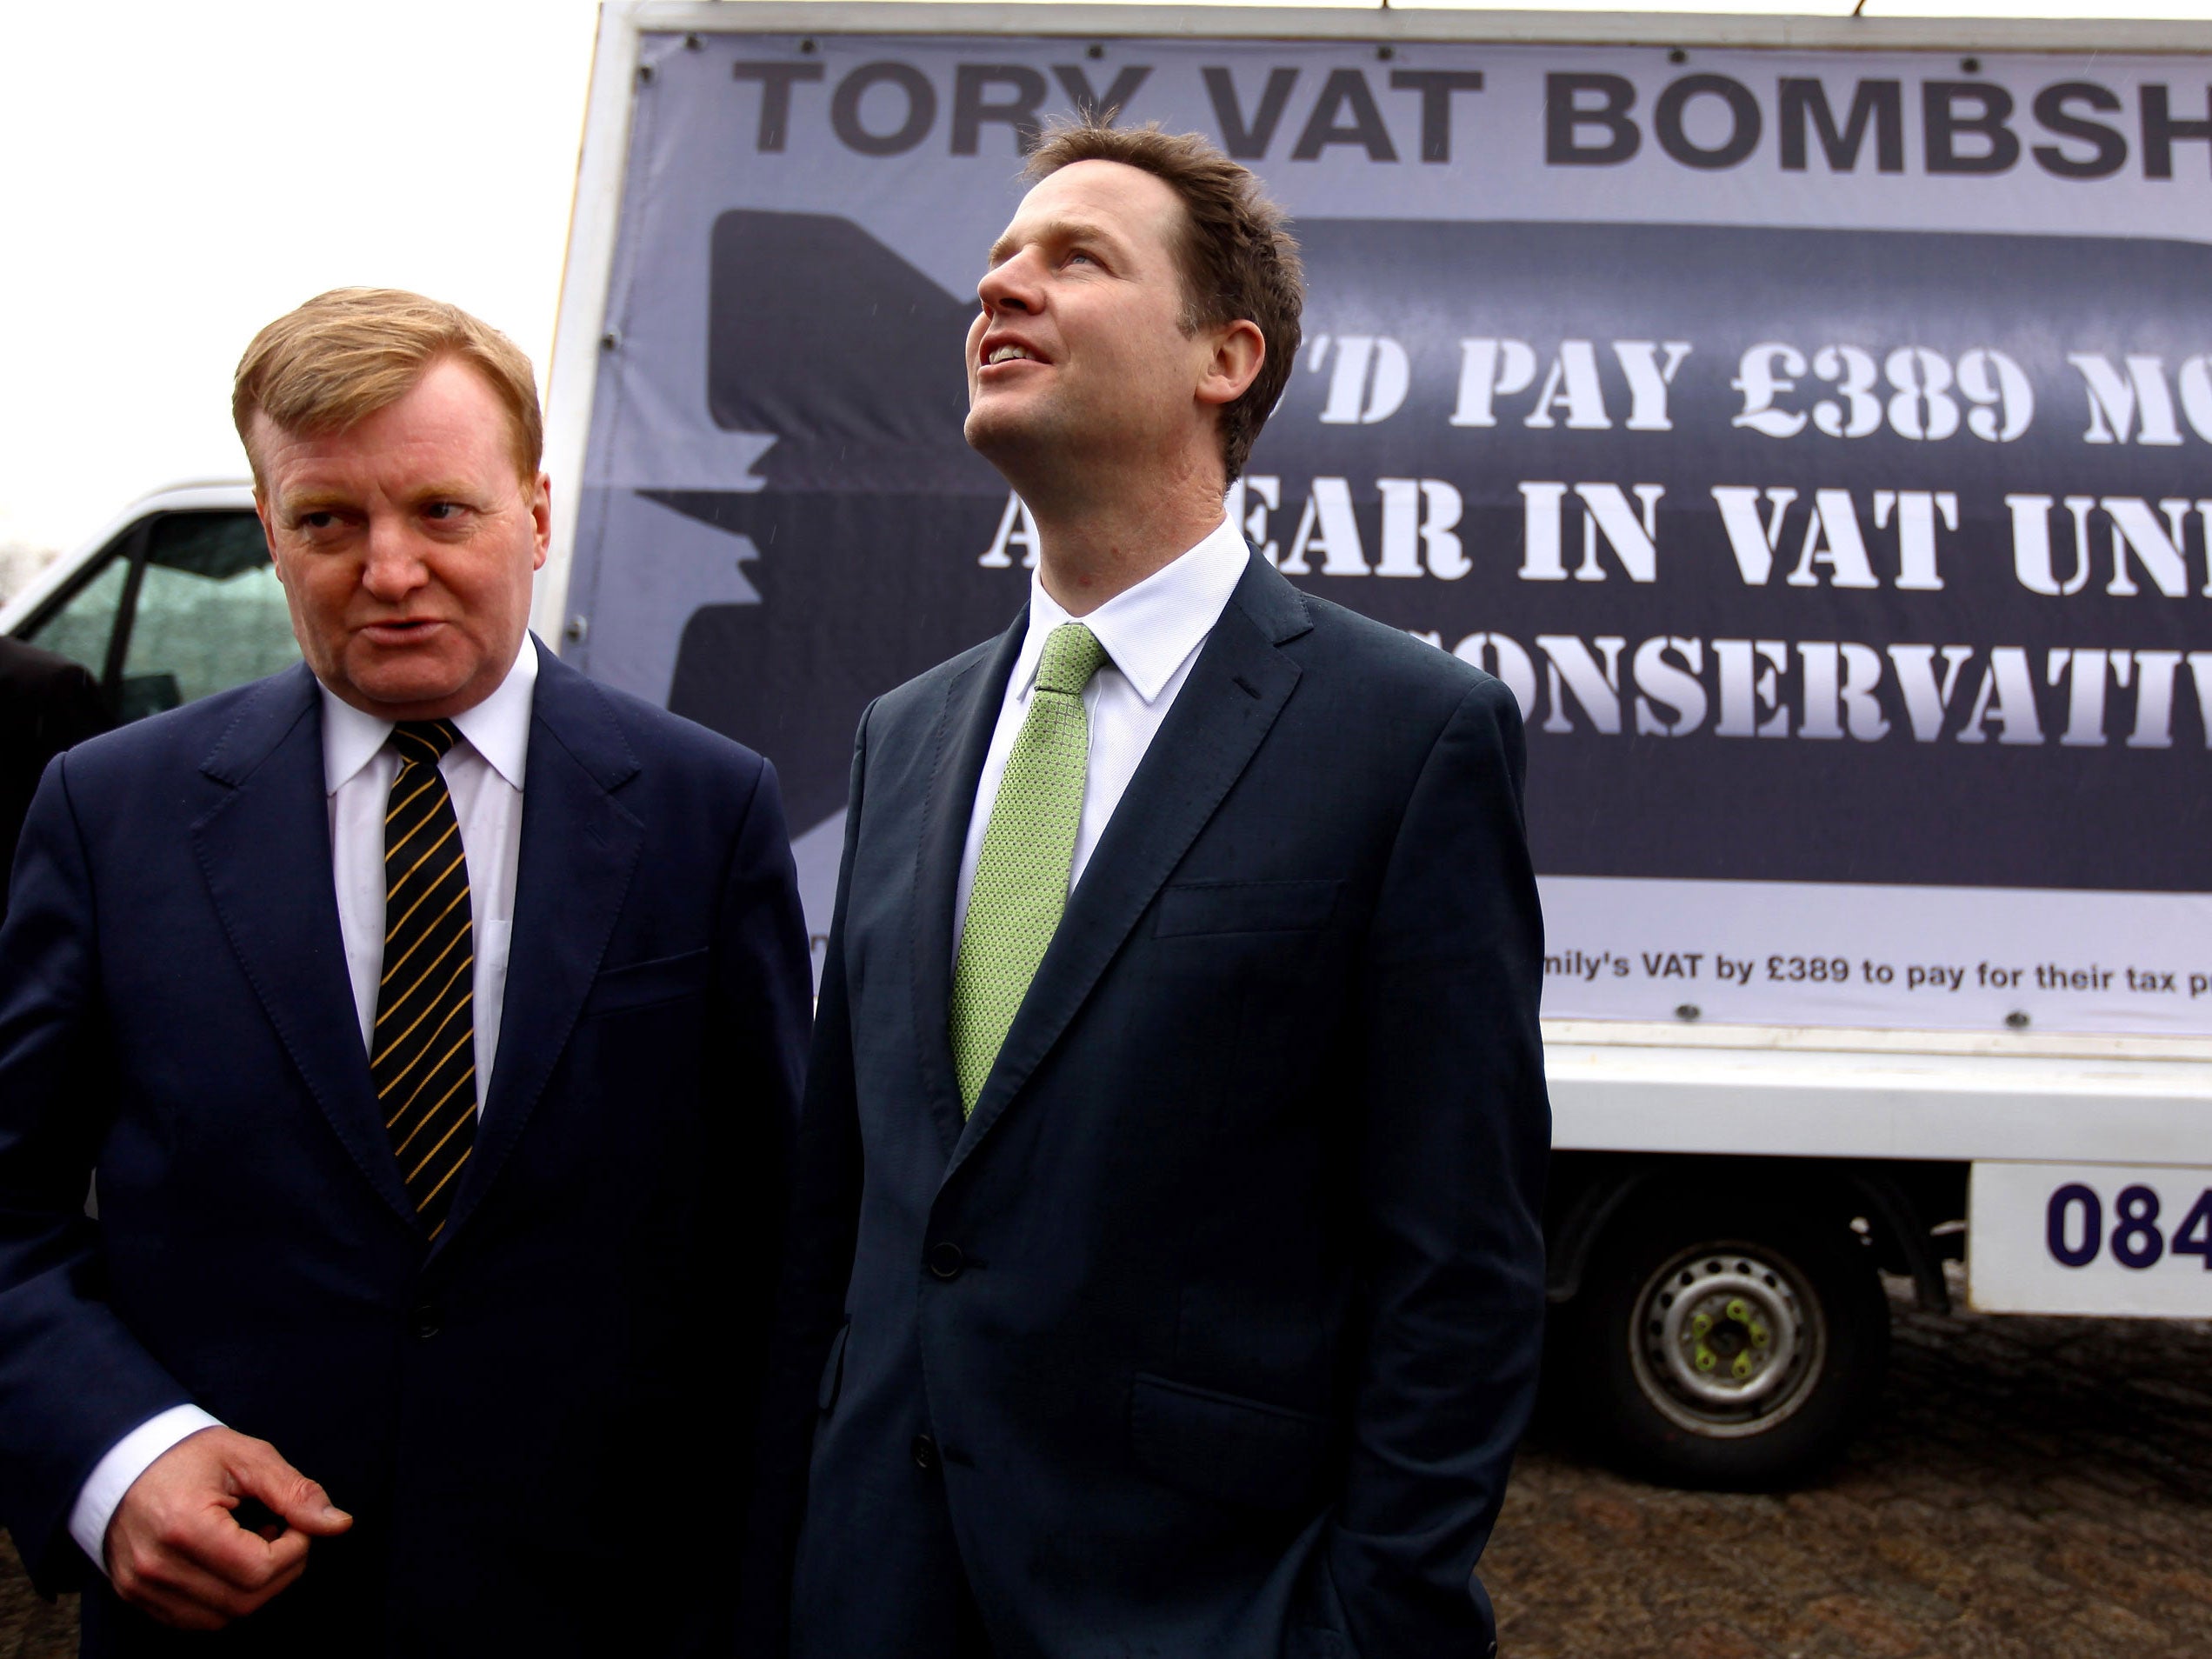 Charles Kennedy with Nick Clegg on the campaign trail ahead of the 2010 general election